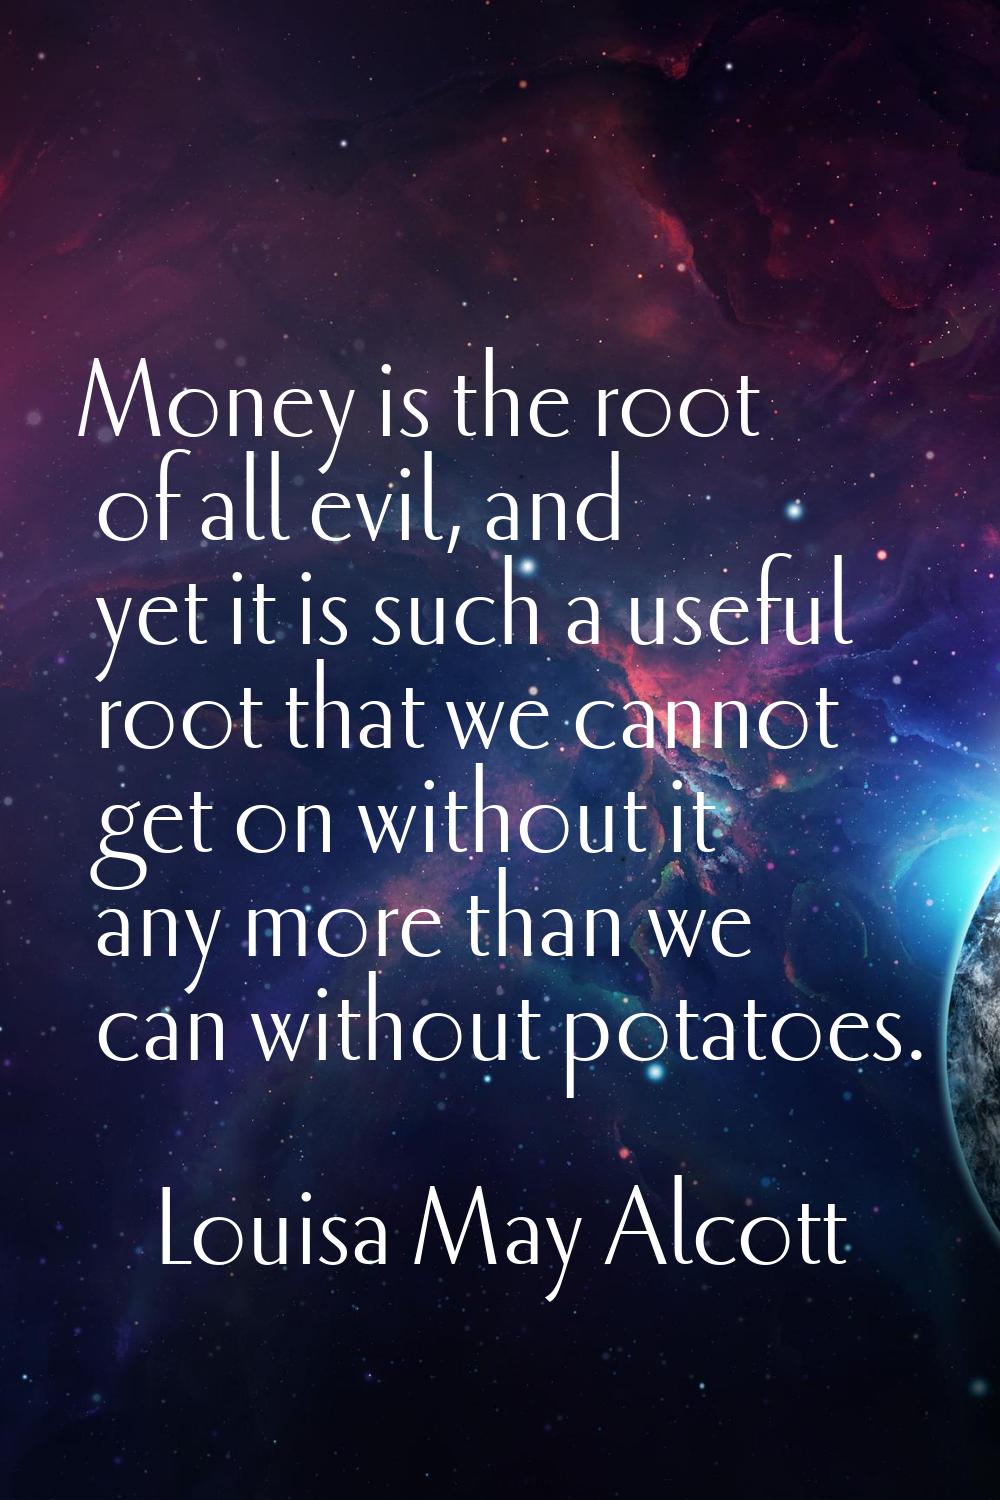 Money is the root of all evil, and yet it is such a useful root that we cannot get on without it an